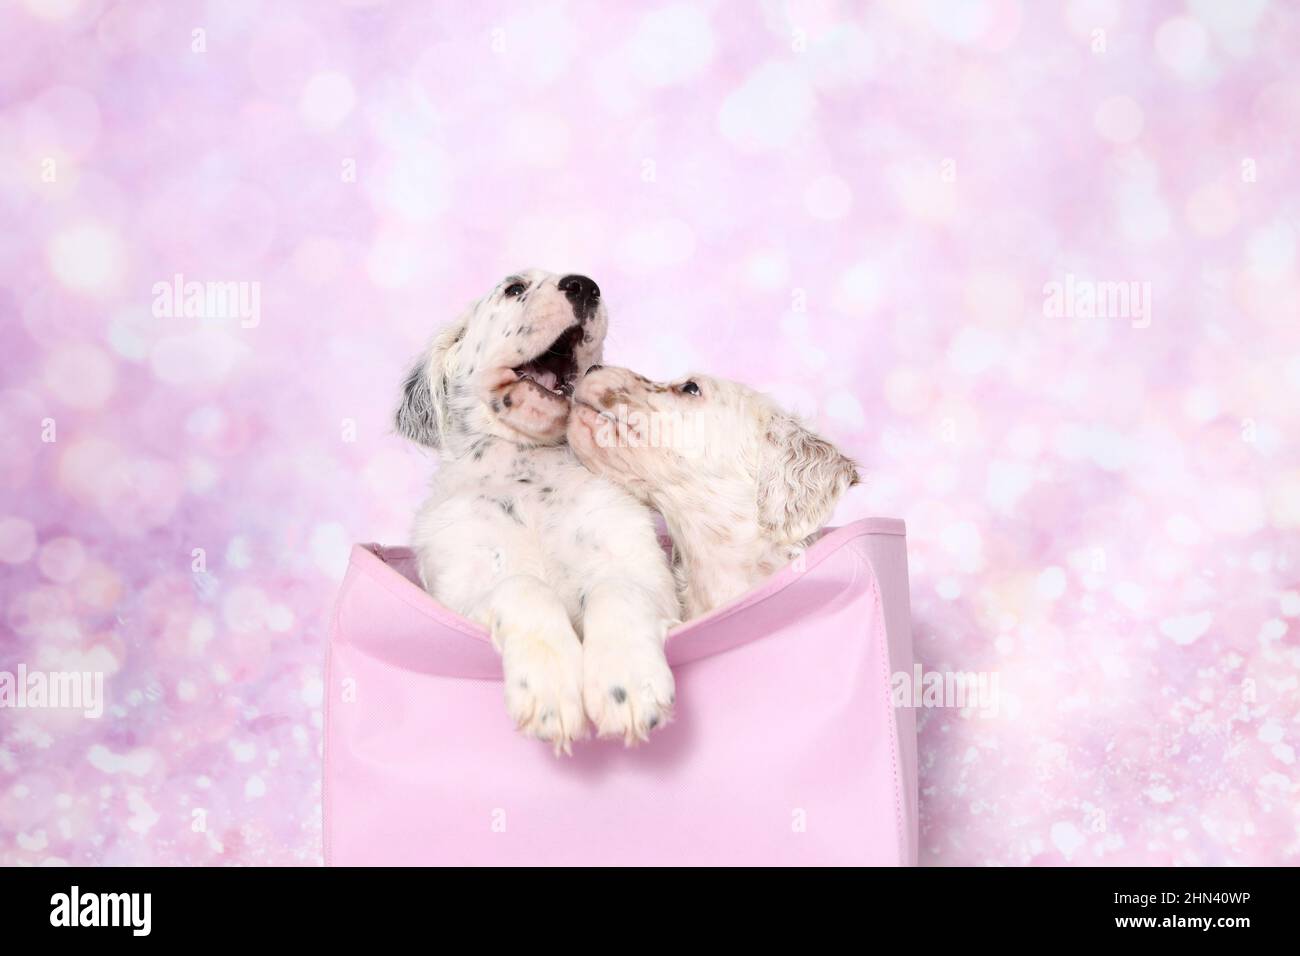 English Setter. Two puppies in a bag, seen against a pink background. Germany Stock Photo